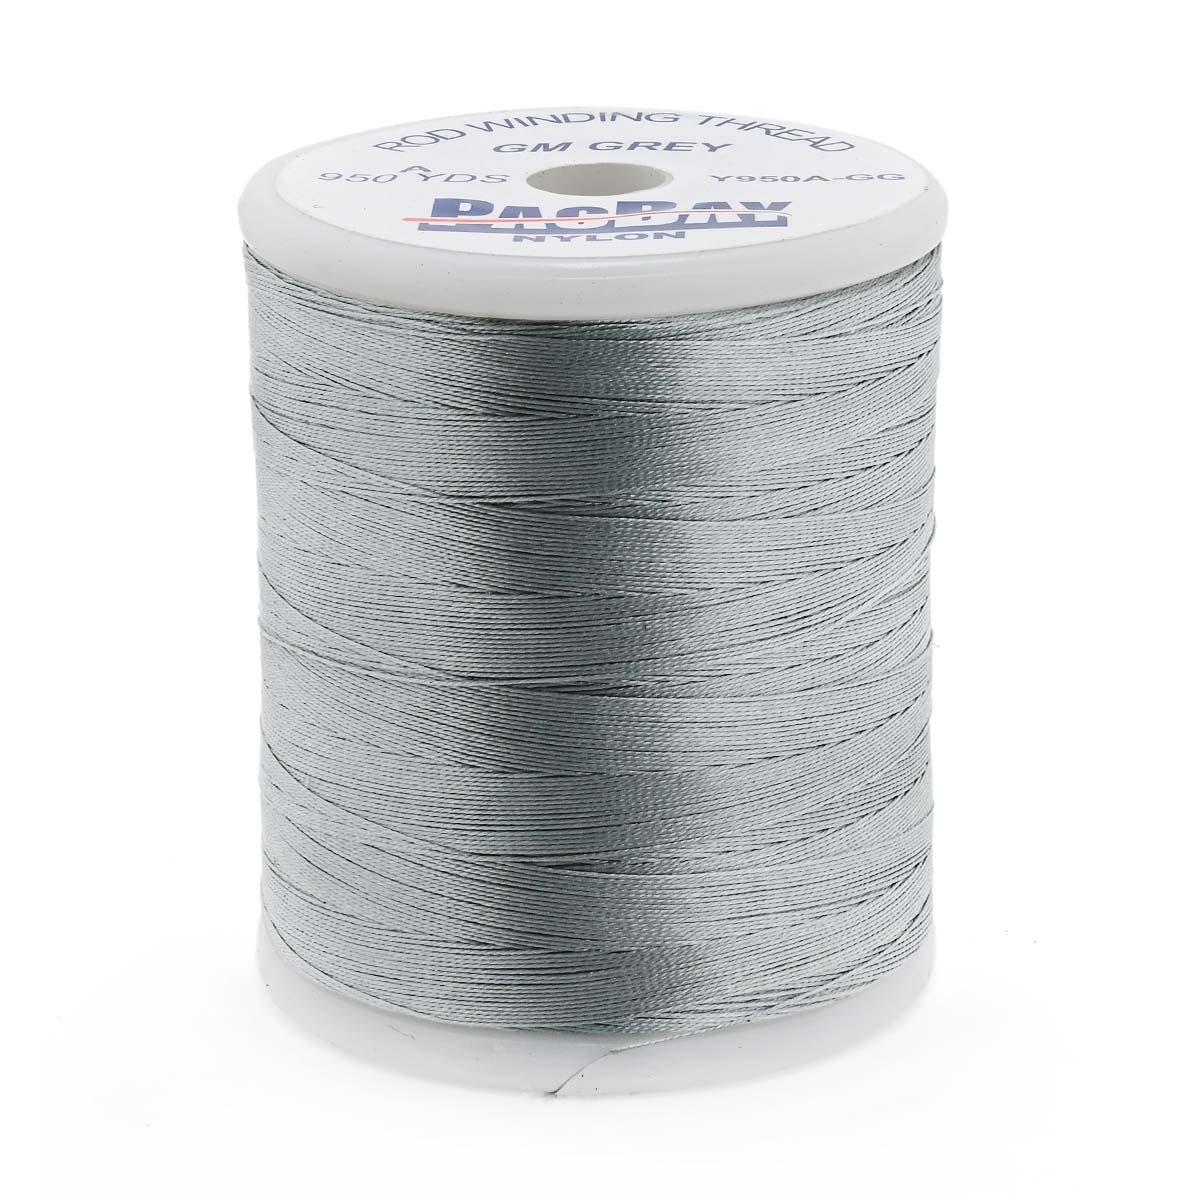 Size A 5 Colors PacBay Metallic Wrapping Thread 